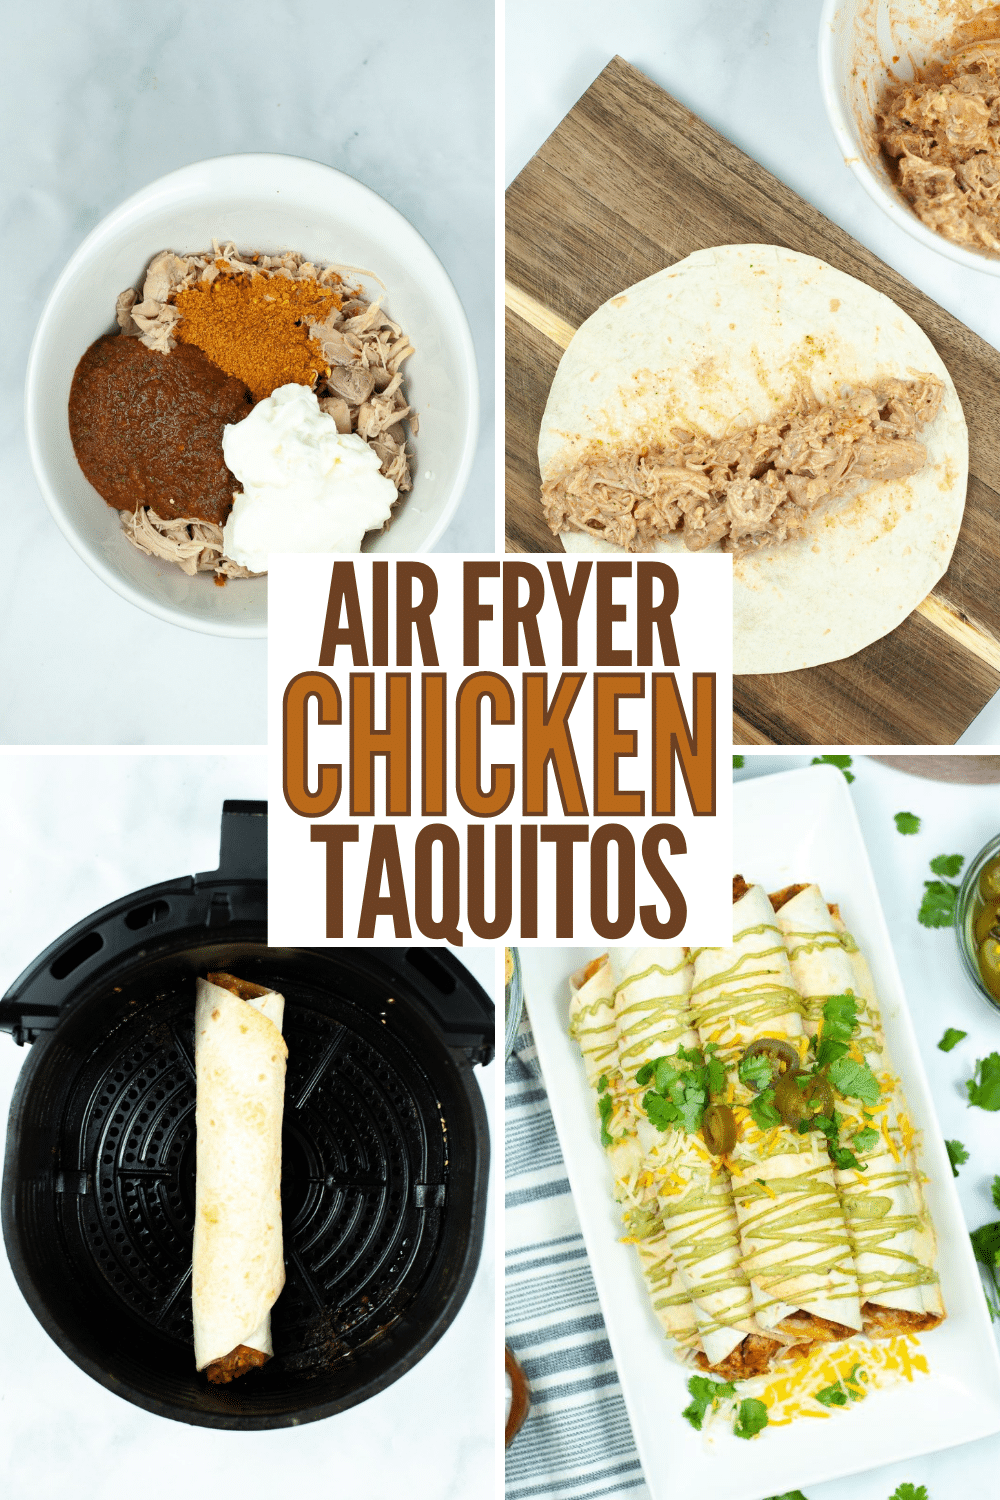 Air Fryer Chicken Taquitos are crispy on the outside and filled with flavorful chicken and then air fried to perfection. Kids love them! #airfryer #chickentaquitos #recipe #taquitos #chicken via @wondermomwannab